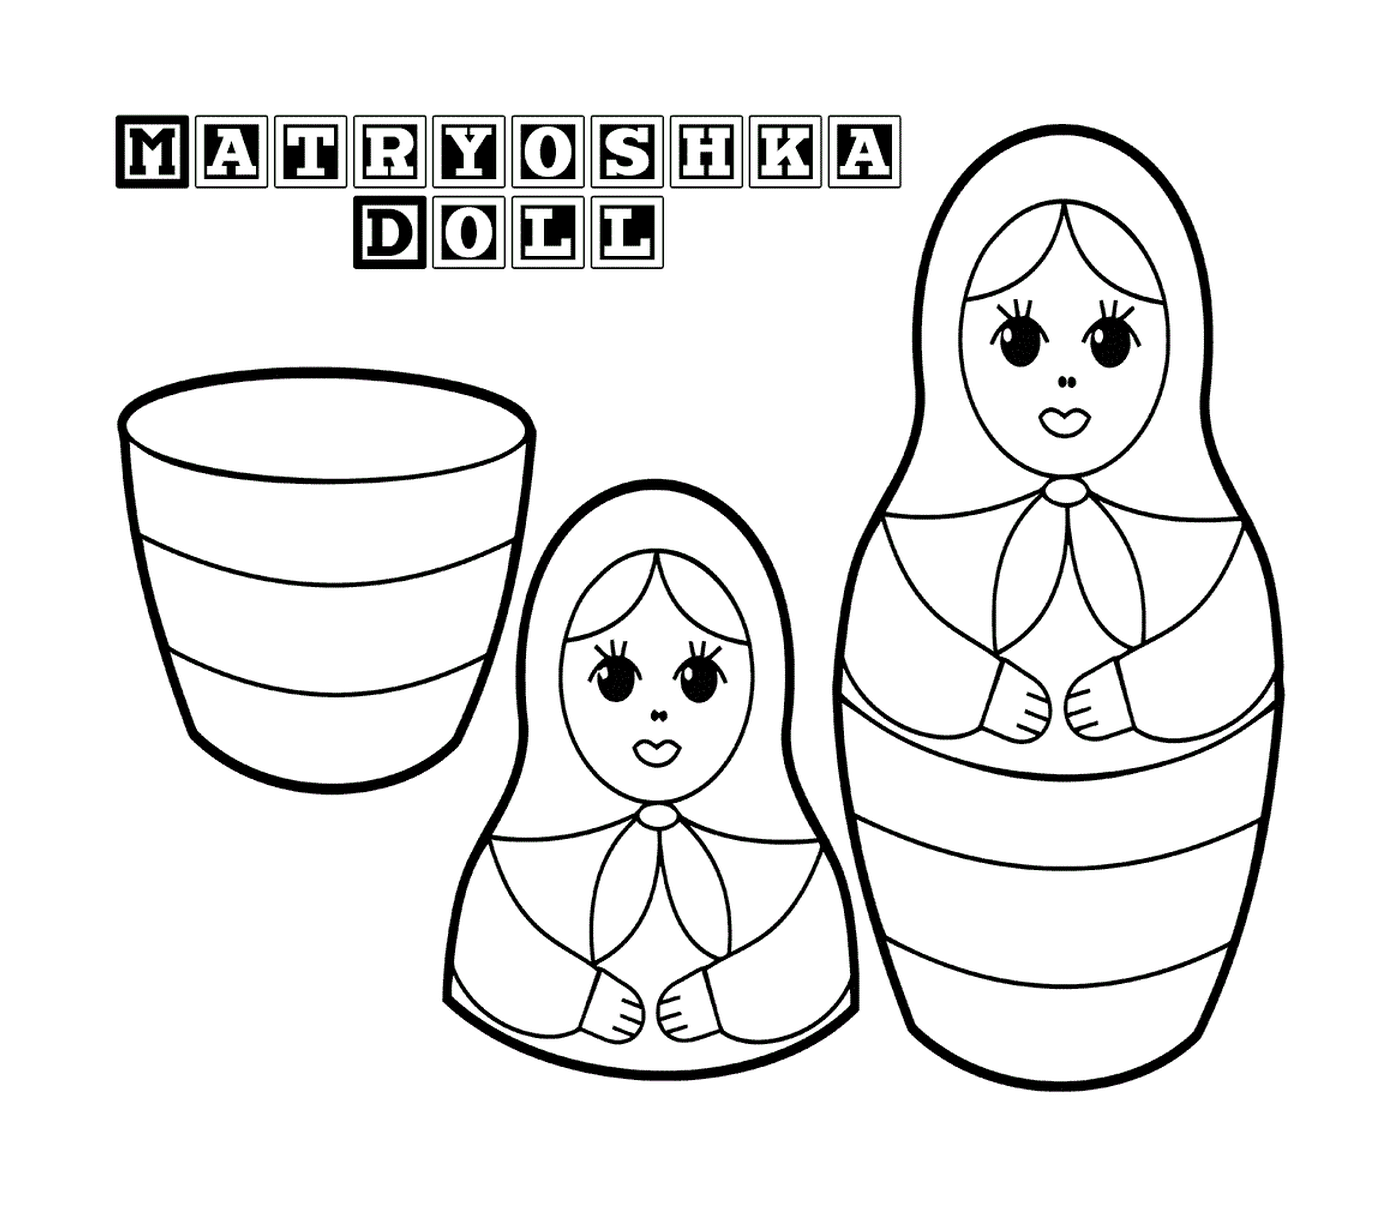  Russian doll and matching cup 